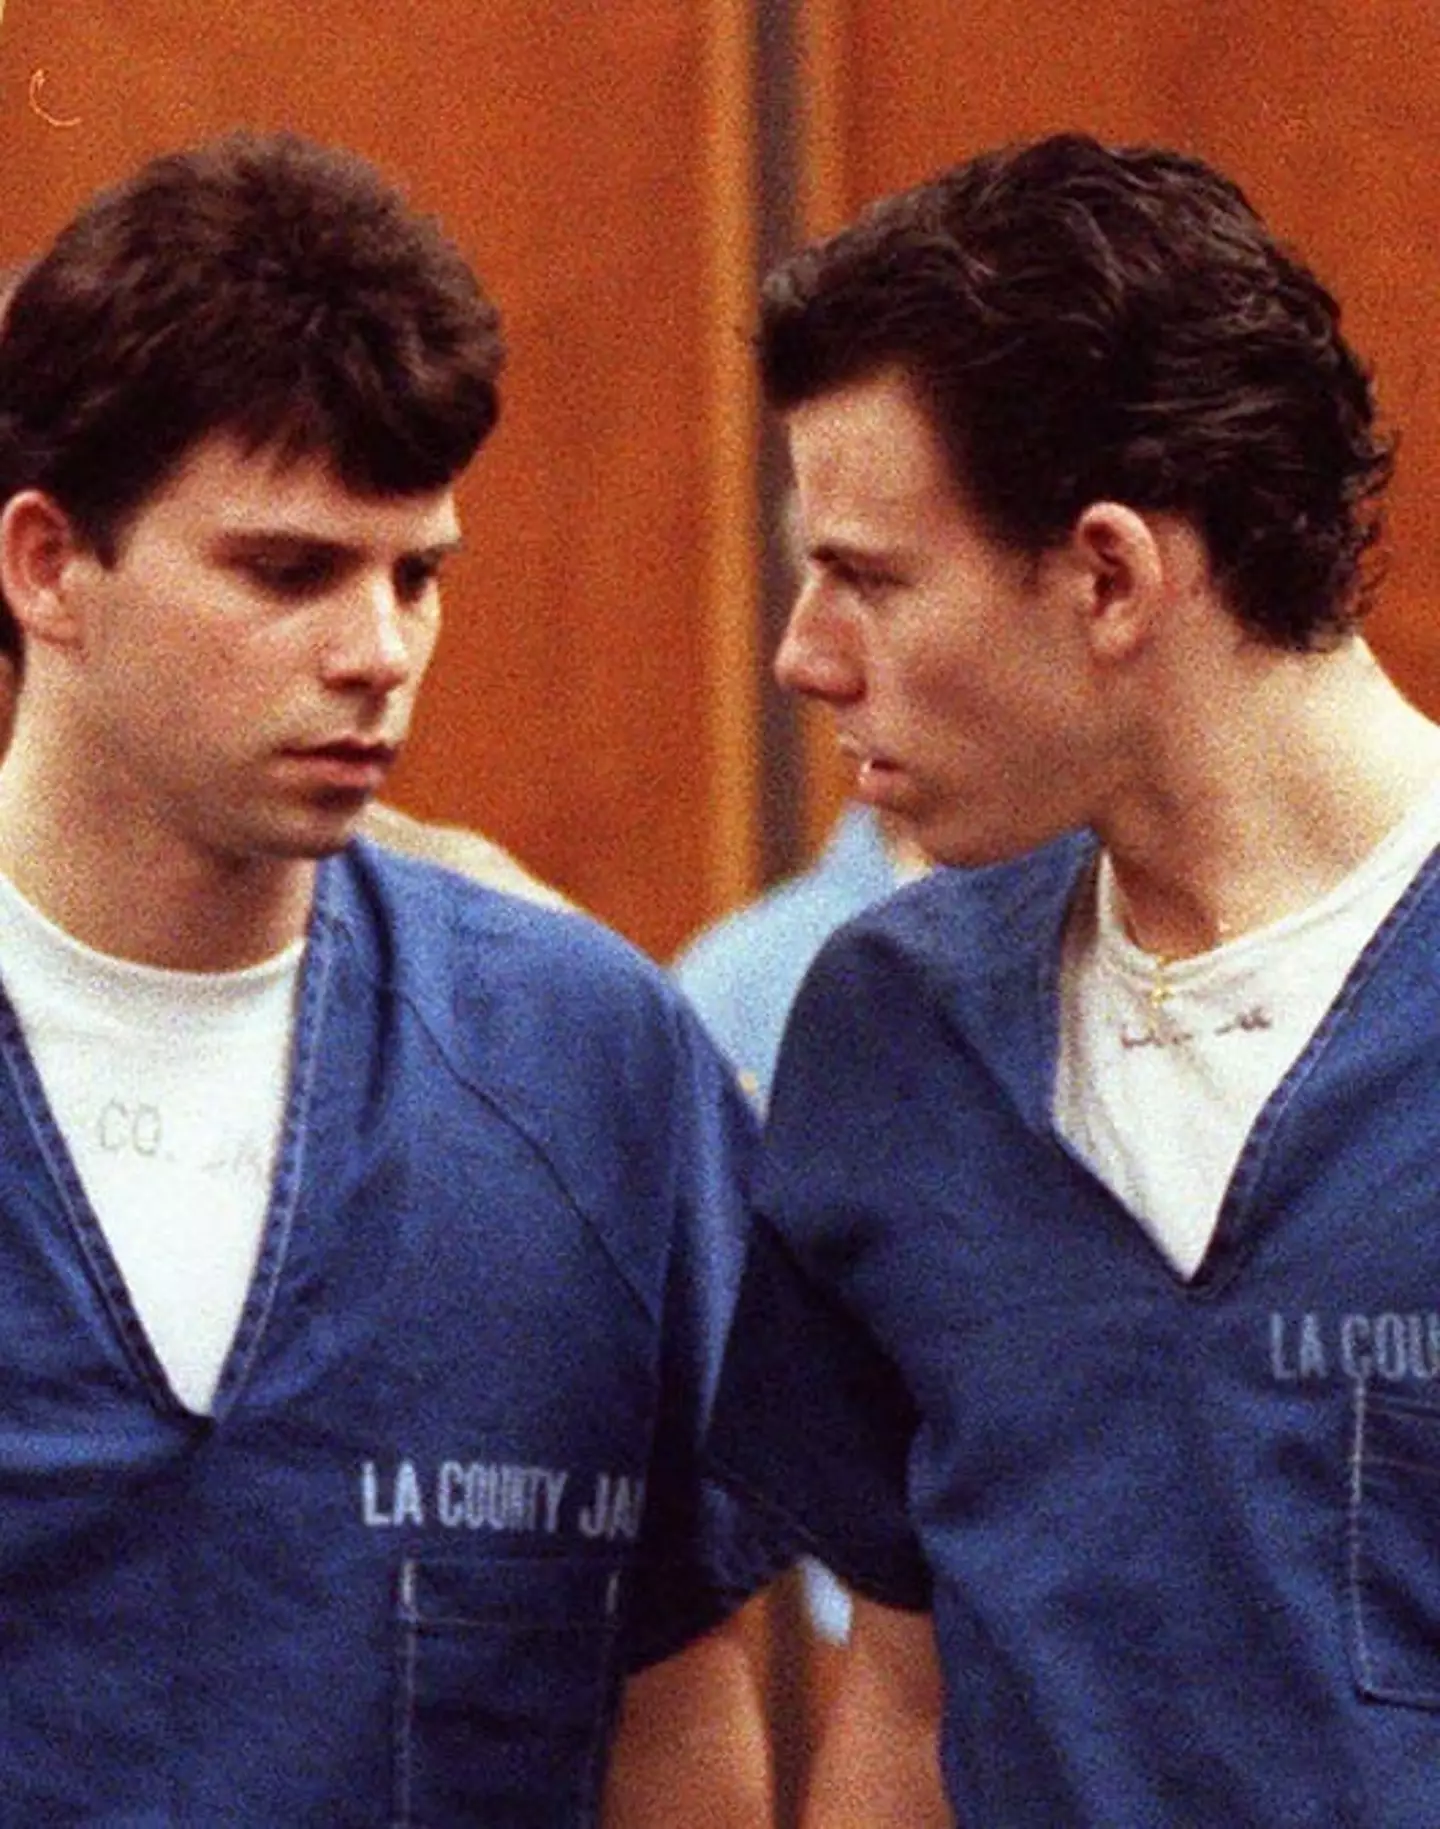 The Menendez brothers have been behind bars since the 90s.